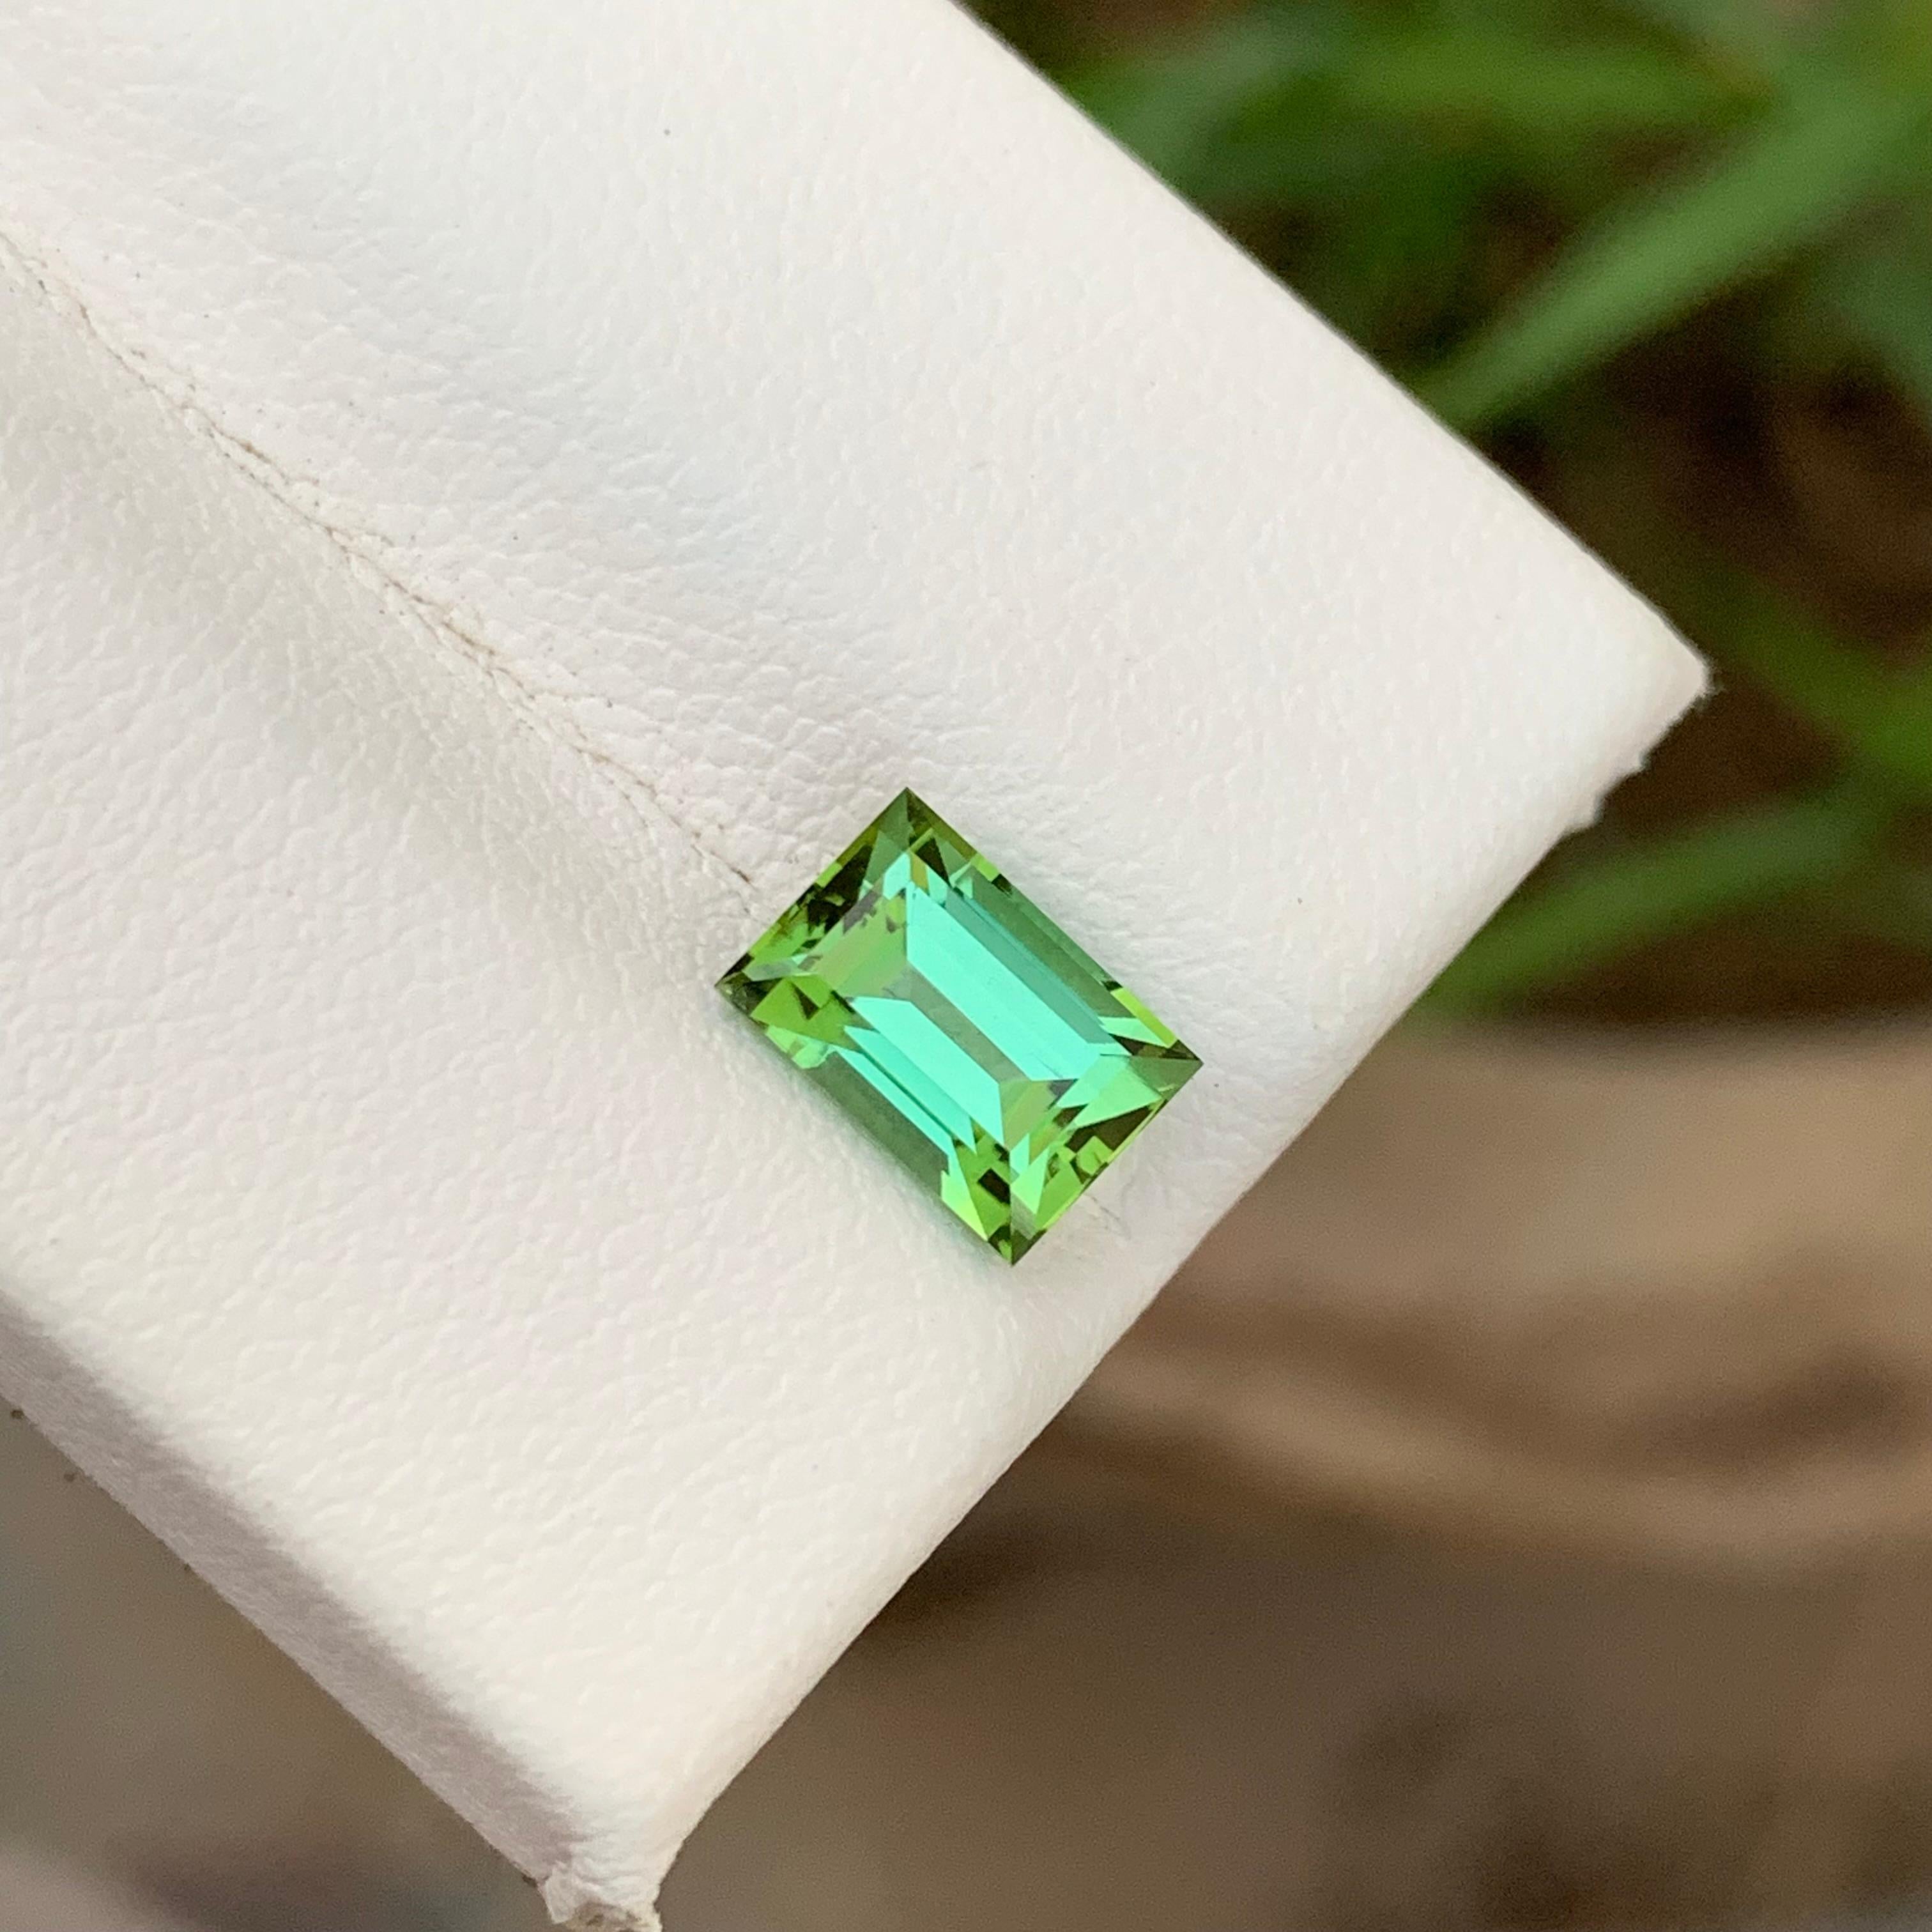 Loupe Clean 1.90 Carats Loose Green Tourmaline With Lagoon Shade Baguette Cut For Sale 3